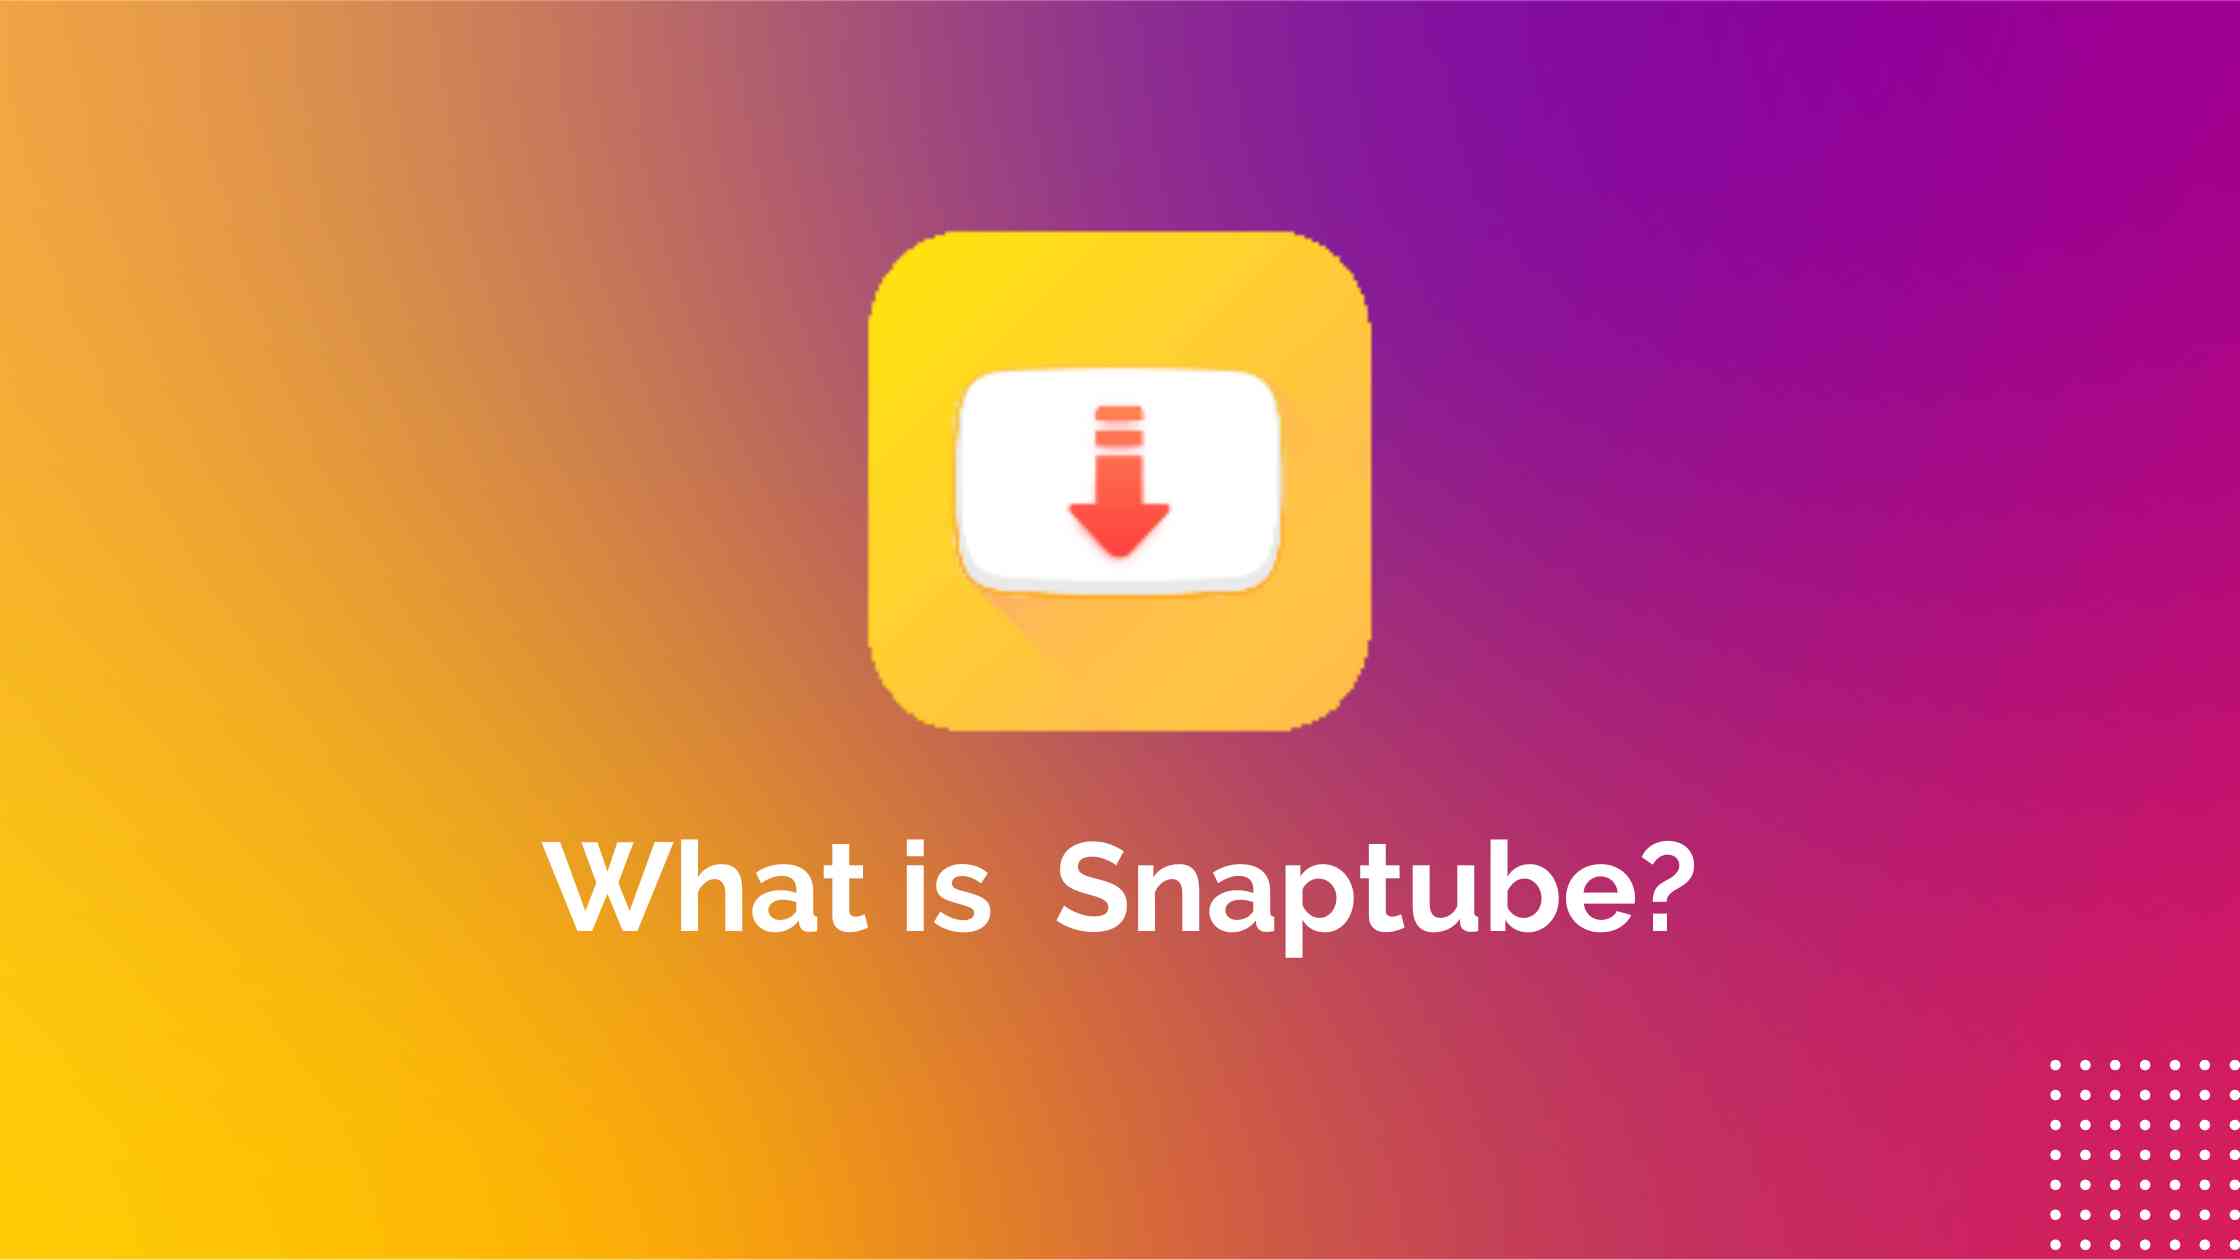 What is Snaptube?